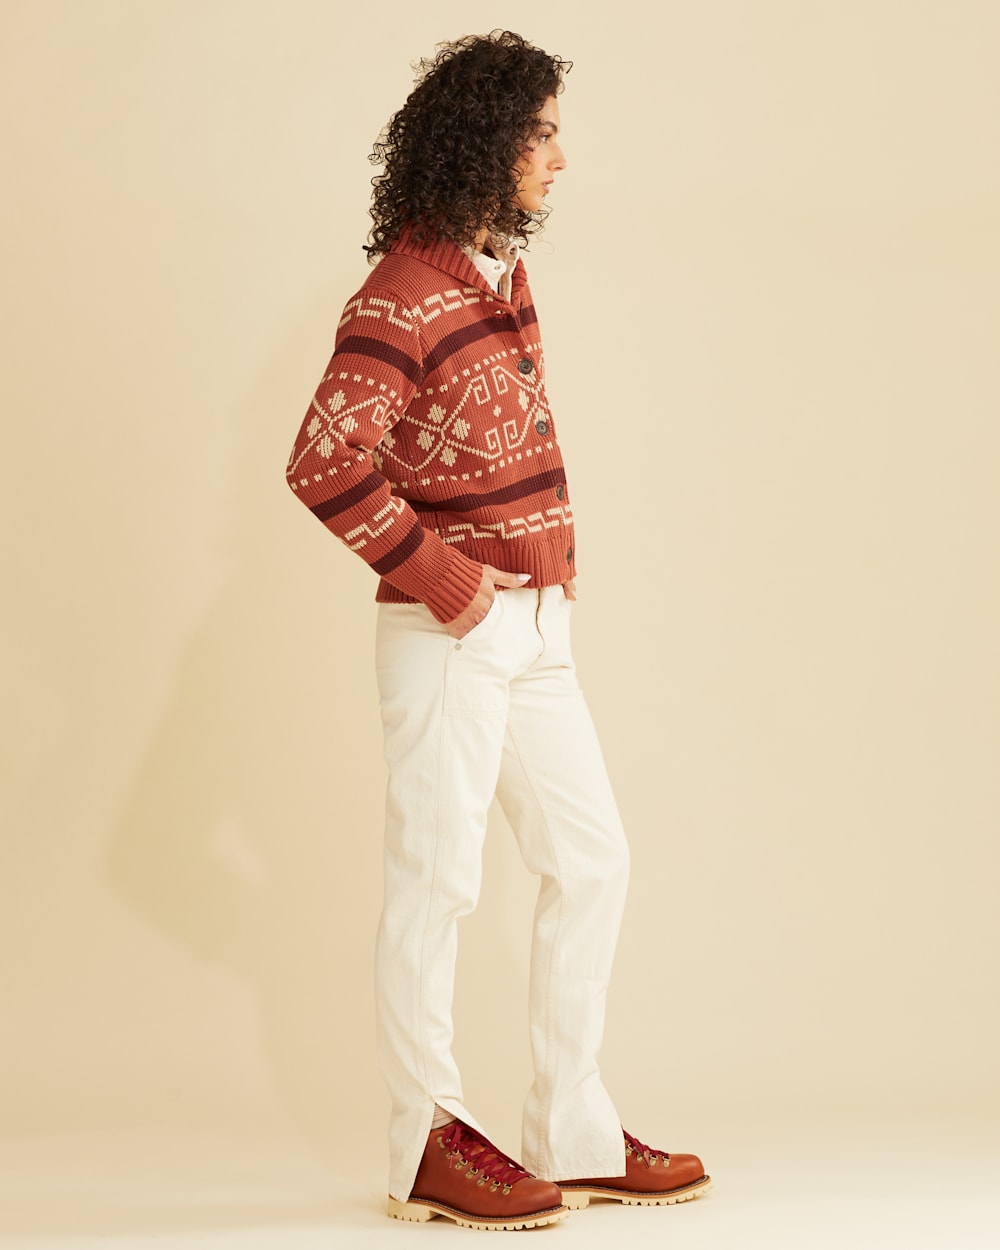 ALTERNATE VIEW OF WOMEN'S WESTERLEY COTTON CARDIGAN IN REDWOOD MULTI image number 5